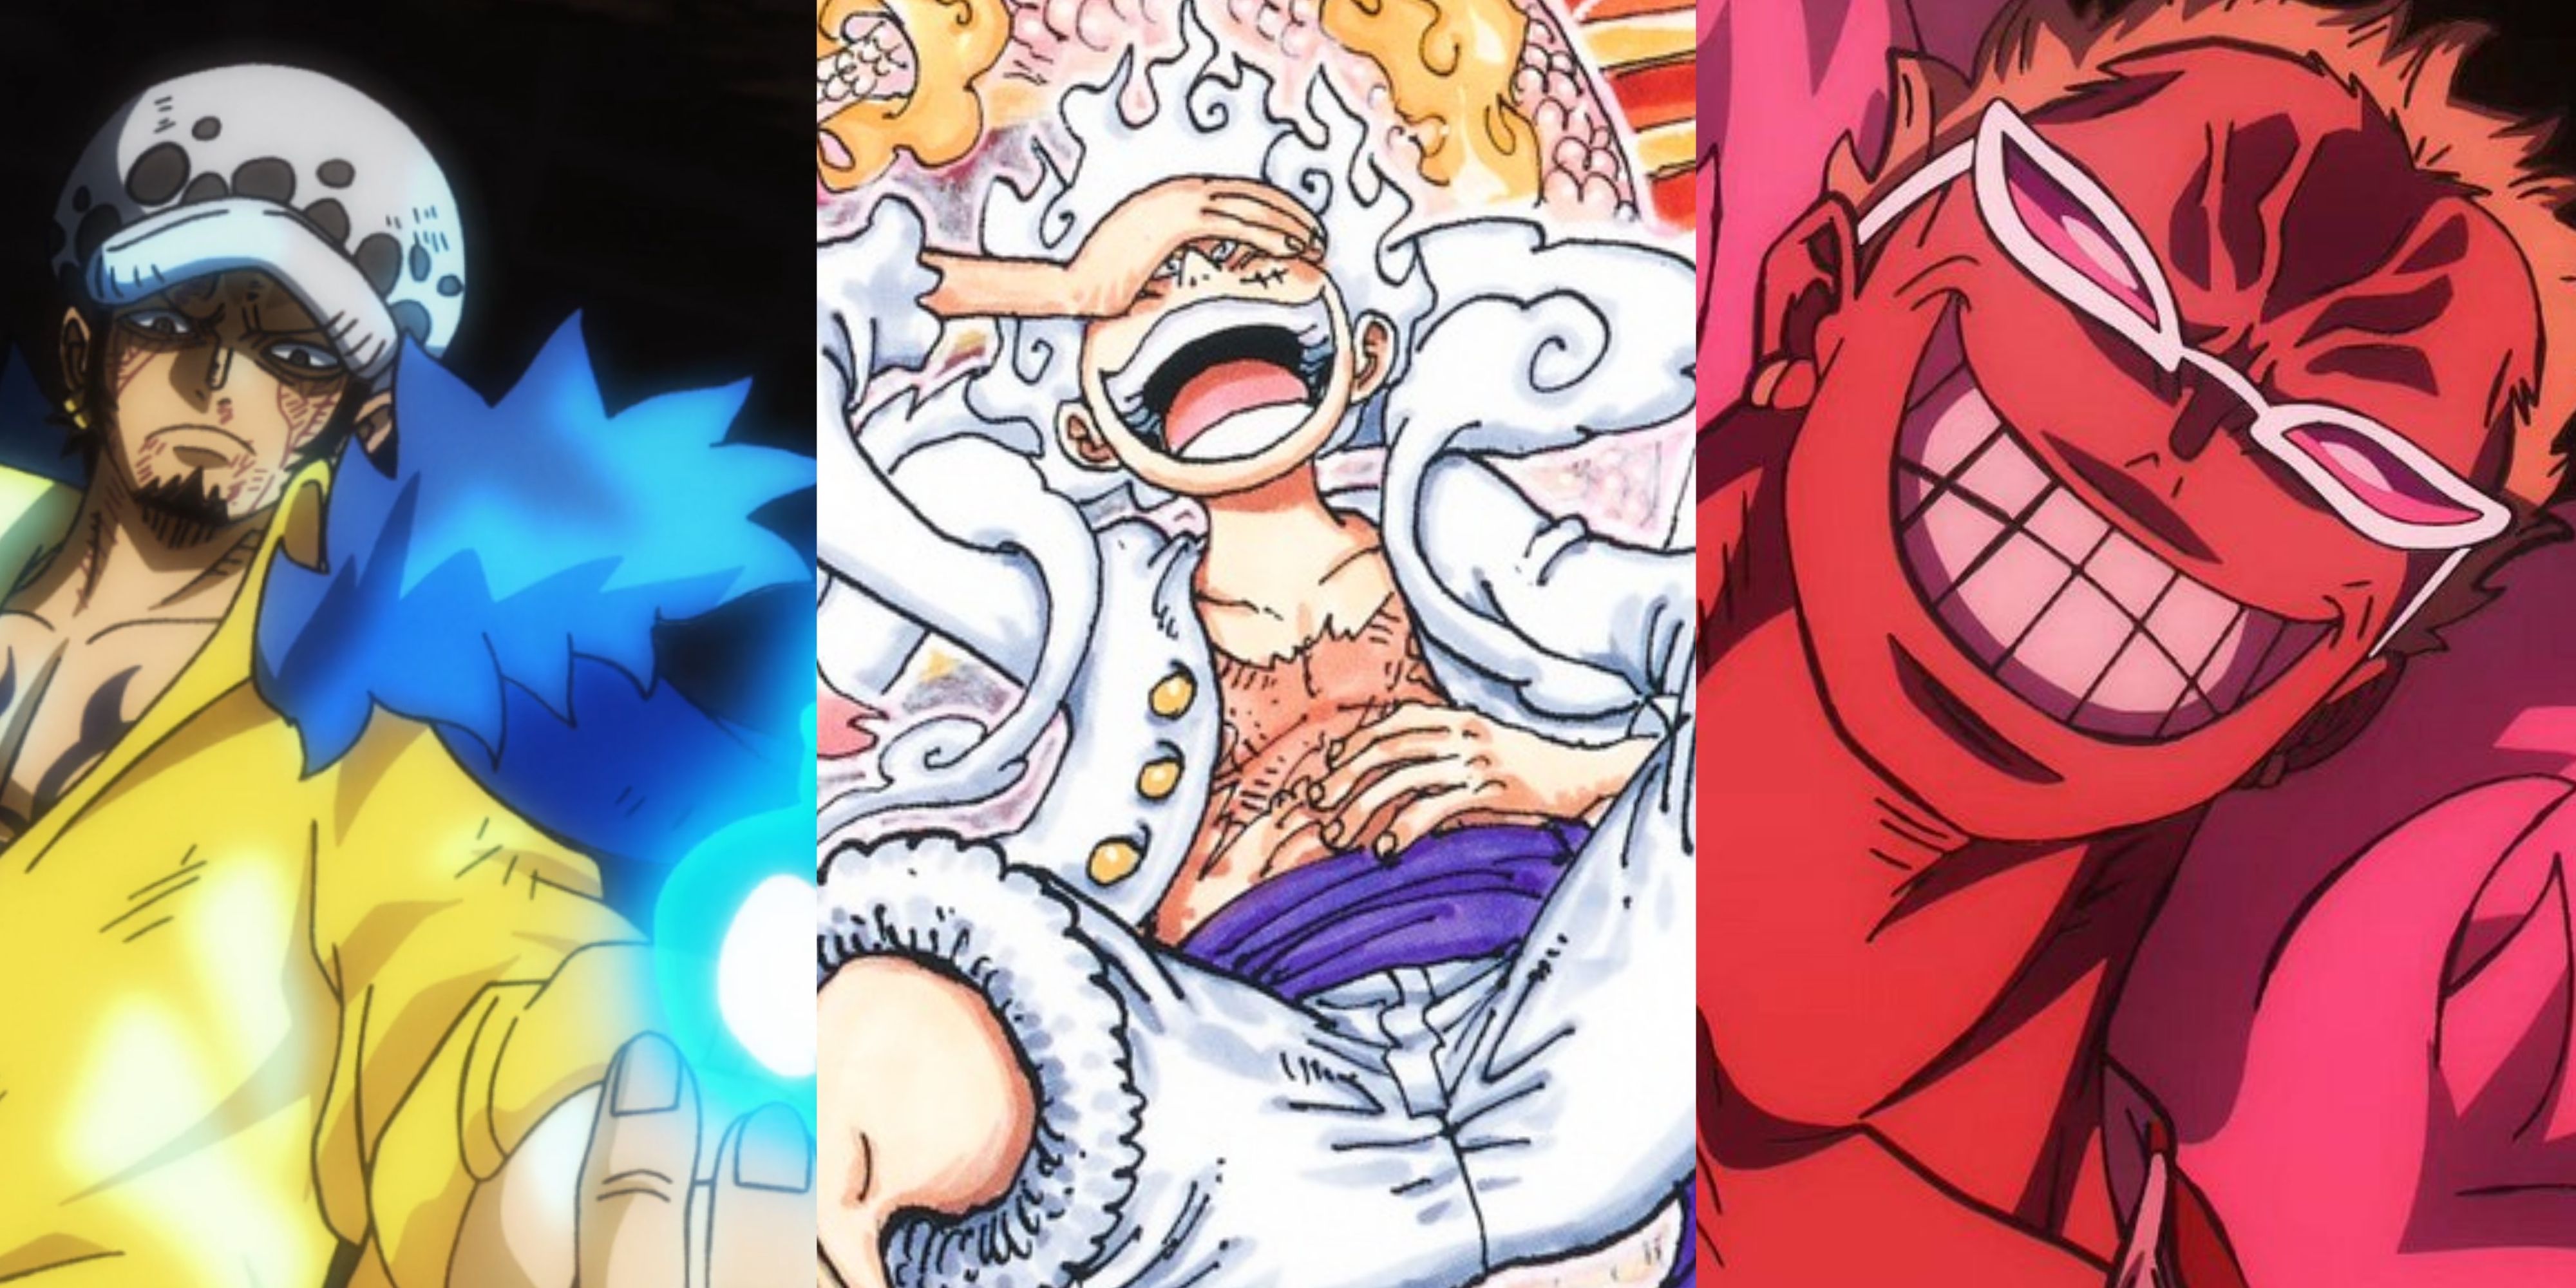 Featured One Piece Creative Devil Fruit Users Luffy Law Doflamingo 